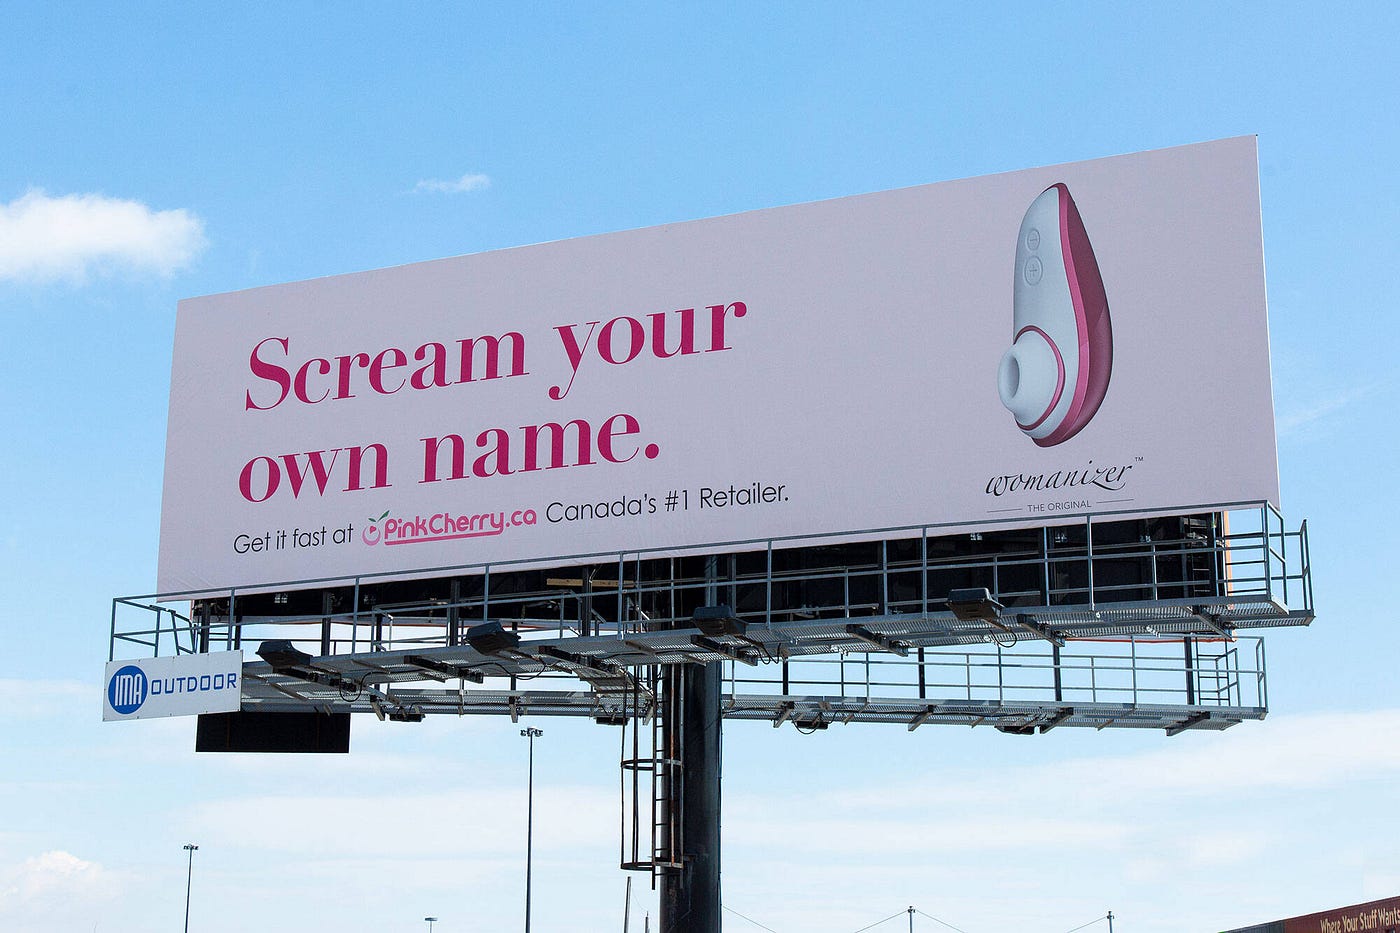 I'm too sexy for my billboard